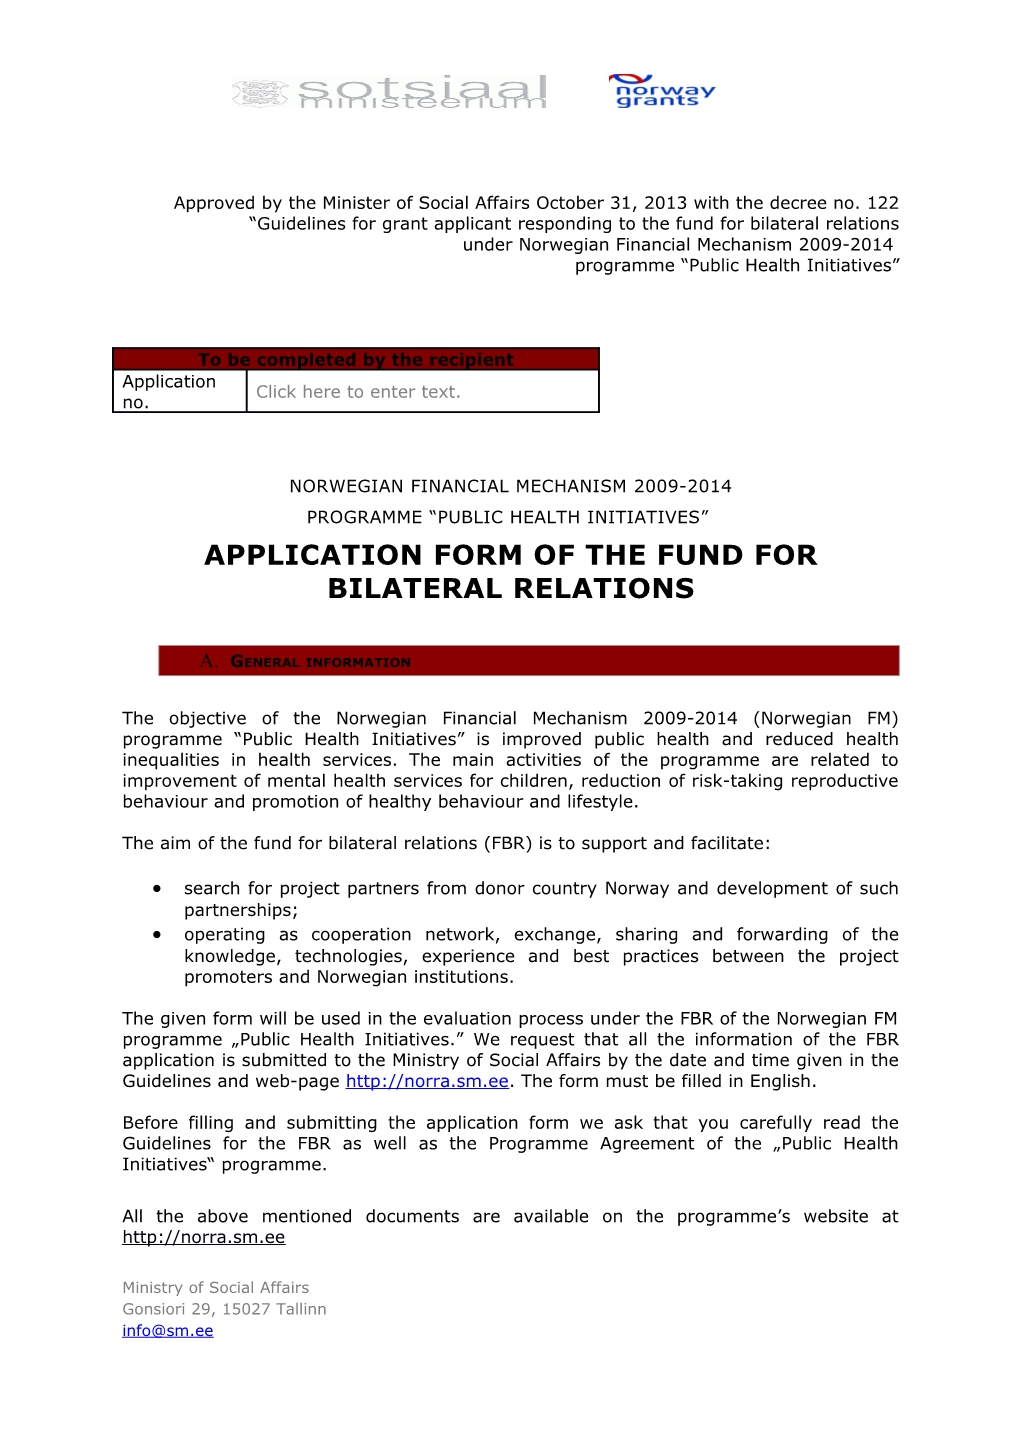 Guidelines for Grant Applicant Responding to the Fund for Bilateral Relations